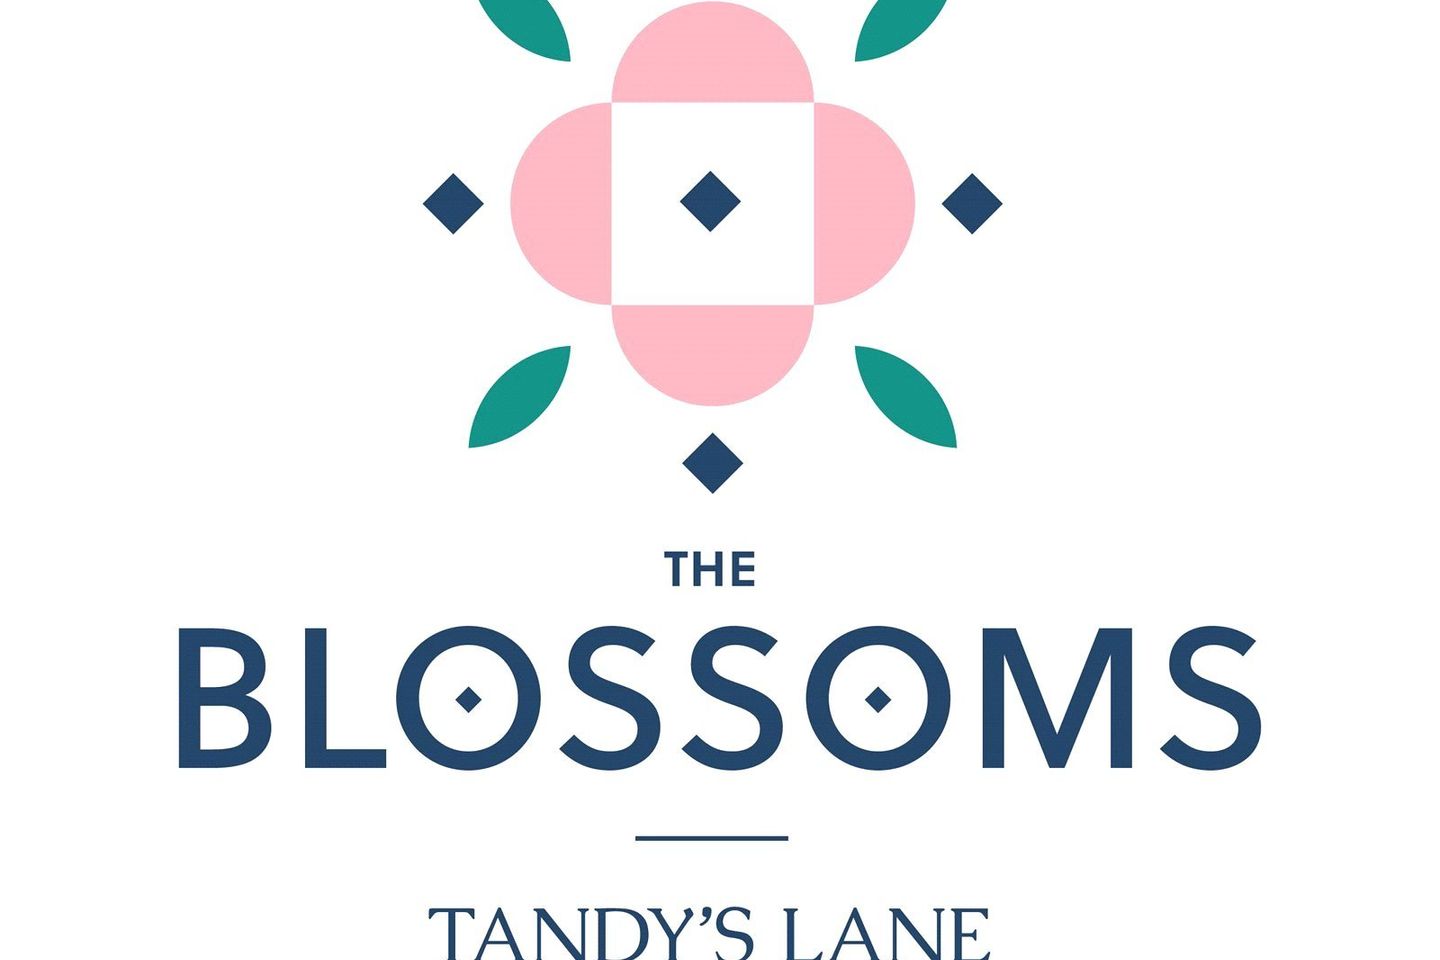 3 Bedroom House, The Blossoms At Tandy's Lane, 3 Bedroom House, The Blossoms, Tandy's Lane, Lucan, Co. Dublin